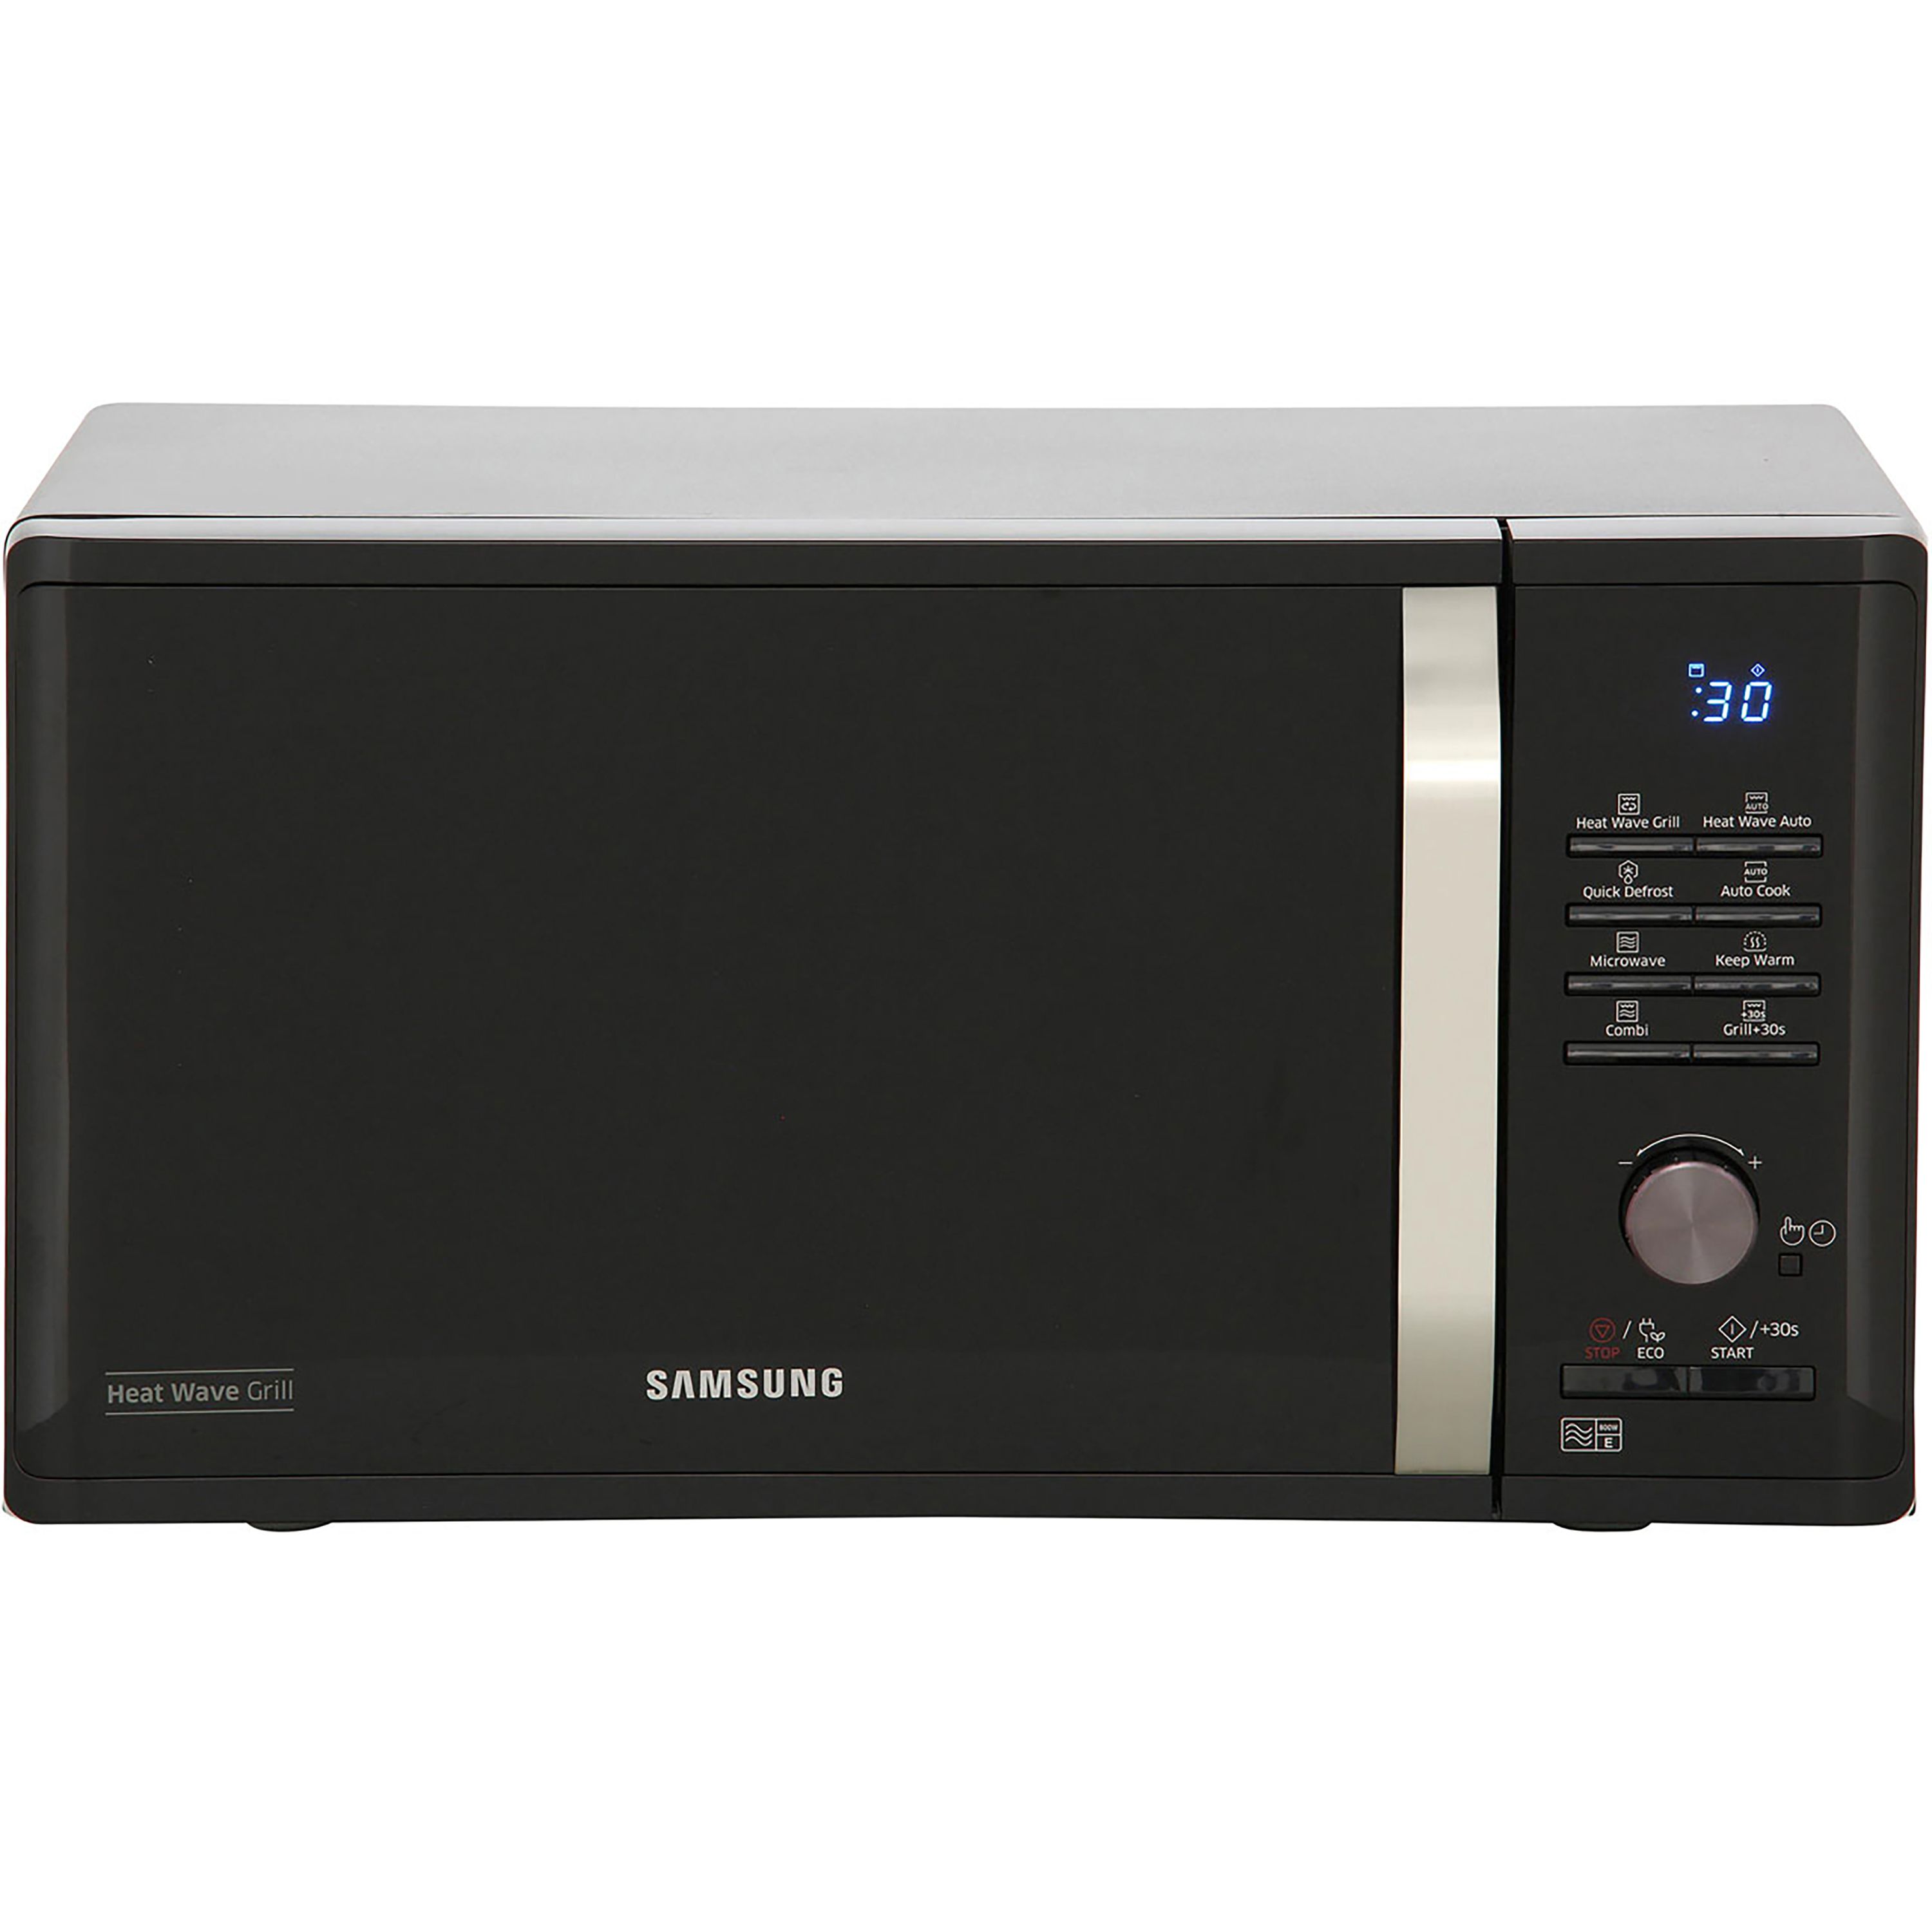 Samsung MG23K3575AK_BK Freestanding Microwave with grill - Black